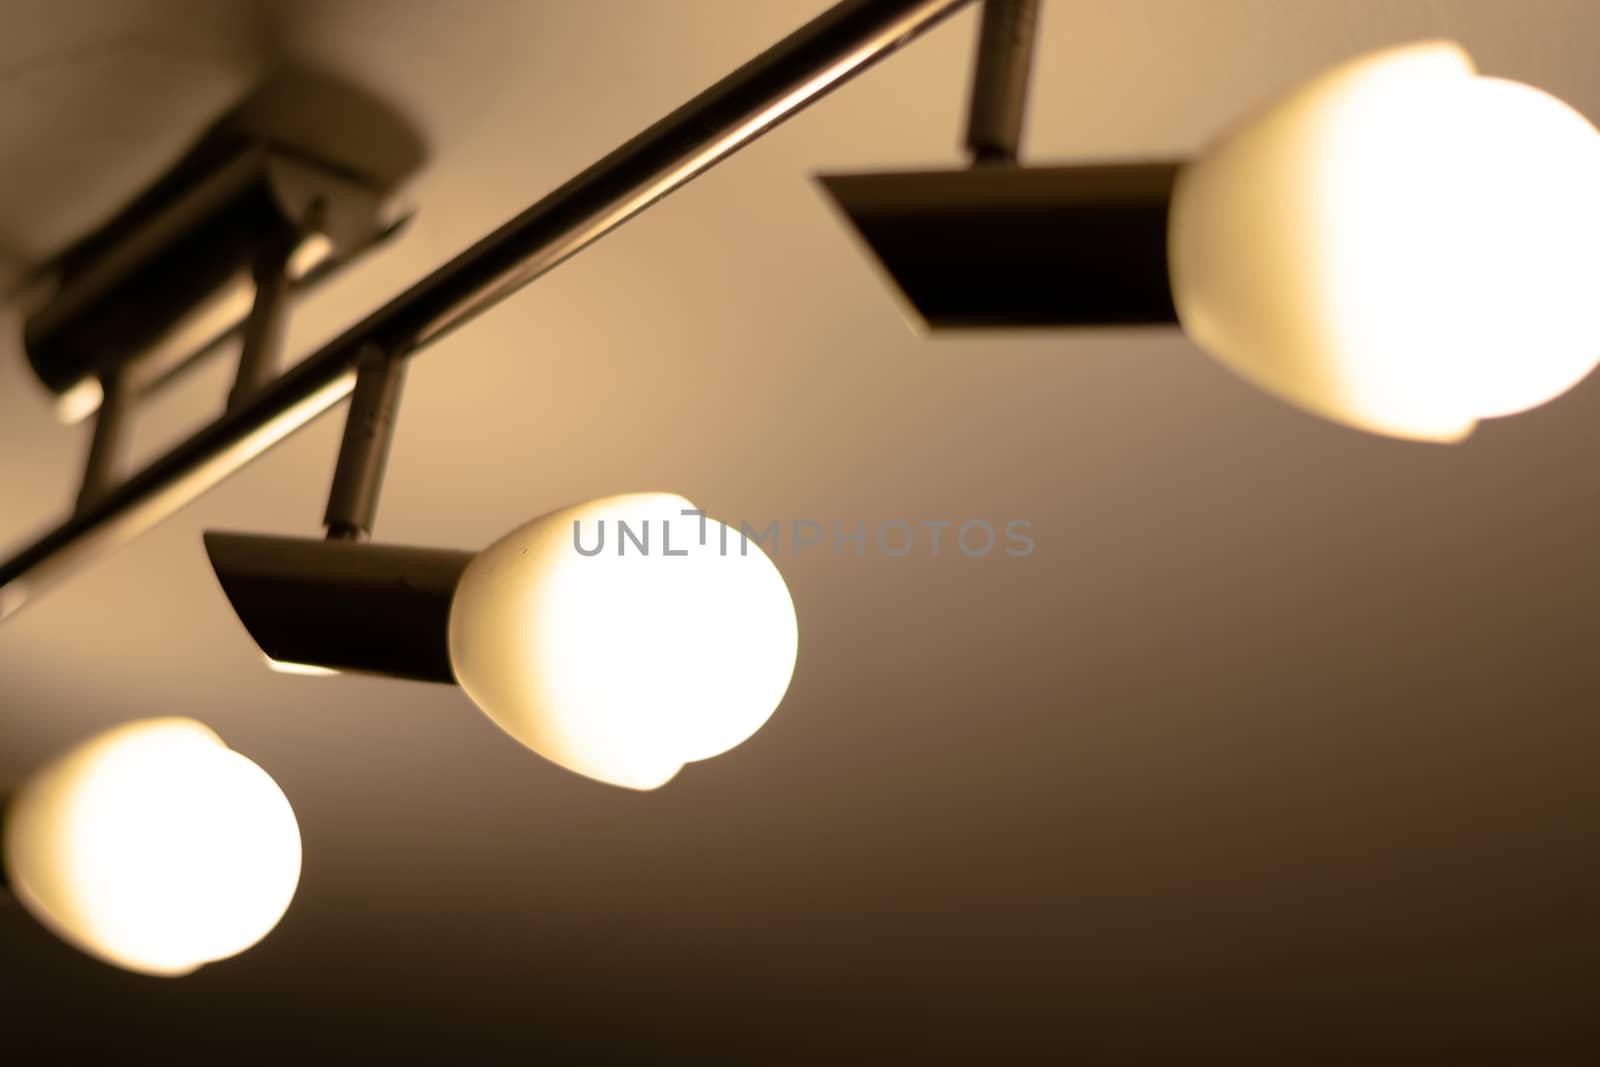 Some warm light bulbs mounted on a ceiling in a house - Electricity and illumination concept, Bucharest, Romania.